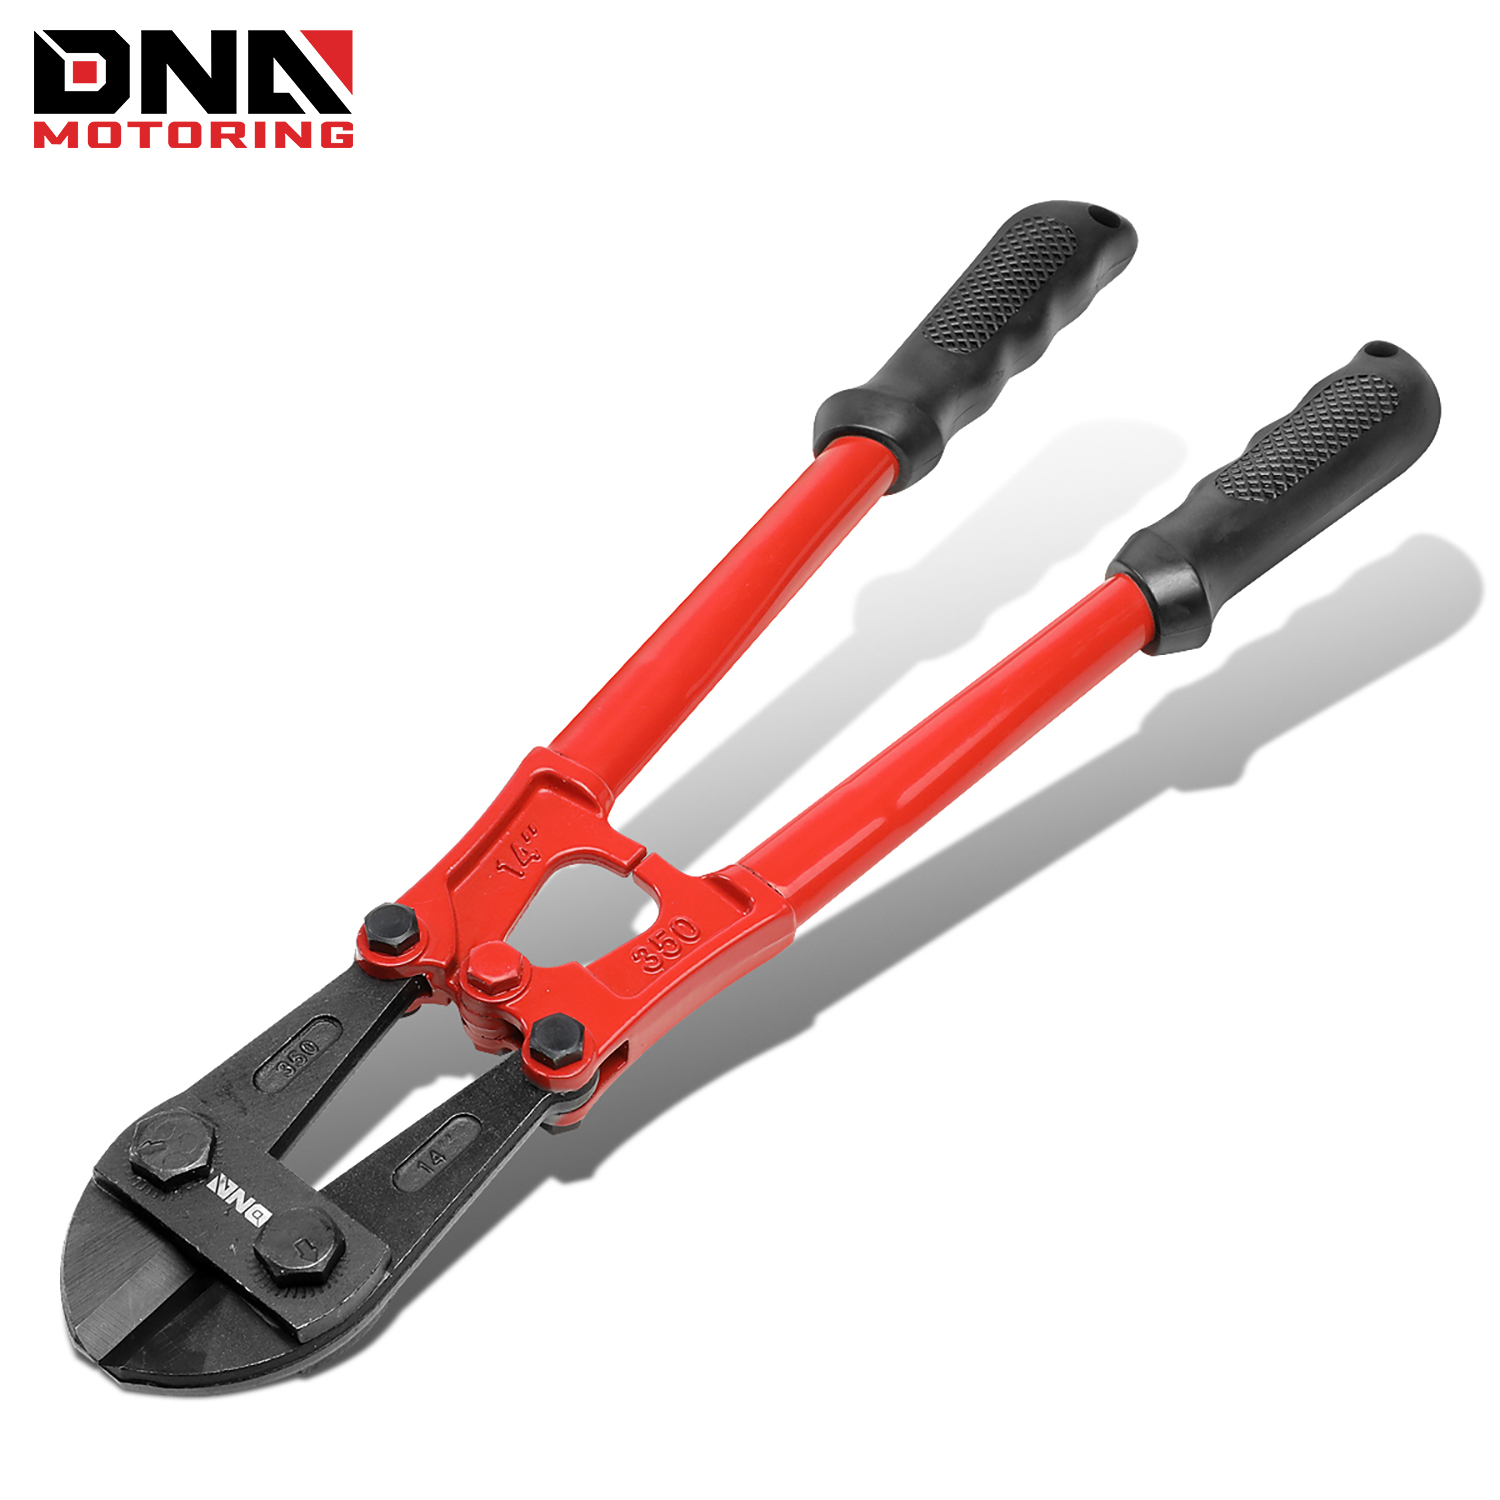 

14 Inch Bolt Cutter - 1/4 In. Jaw Opening Bolt Cutting Tool W/ Tubular Steel Handle, Angled Grips, Painted Surface Finish